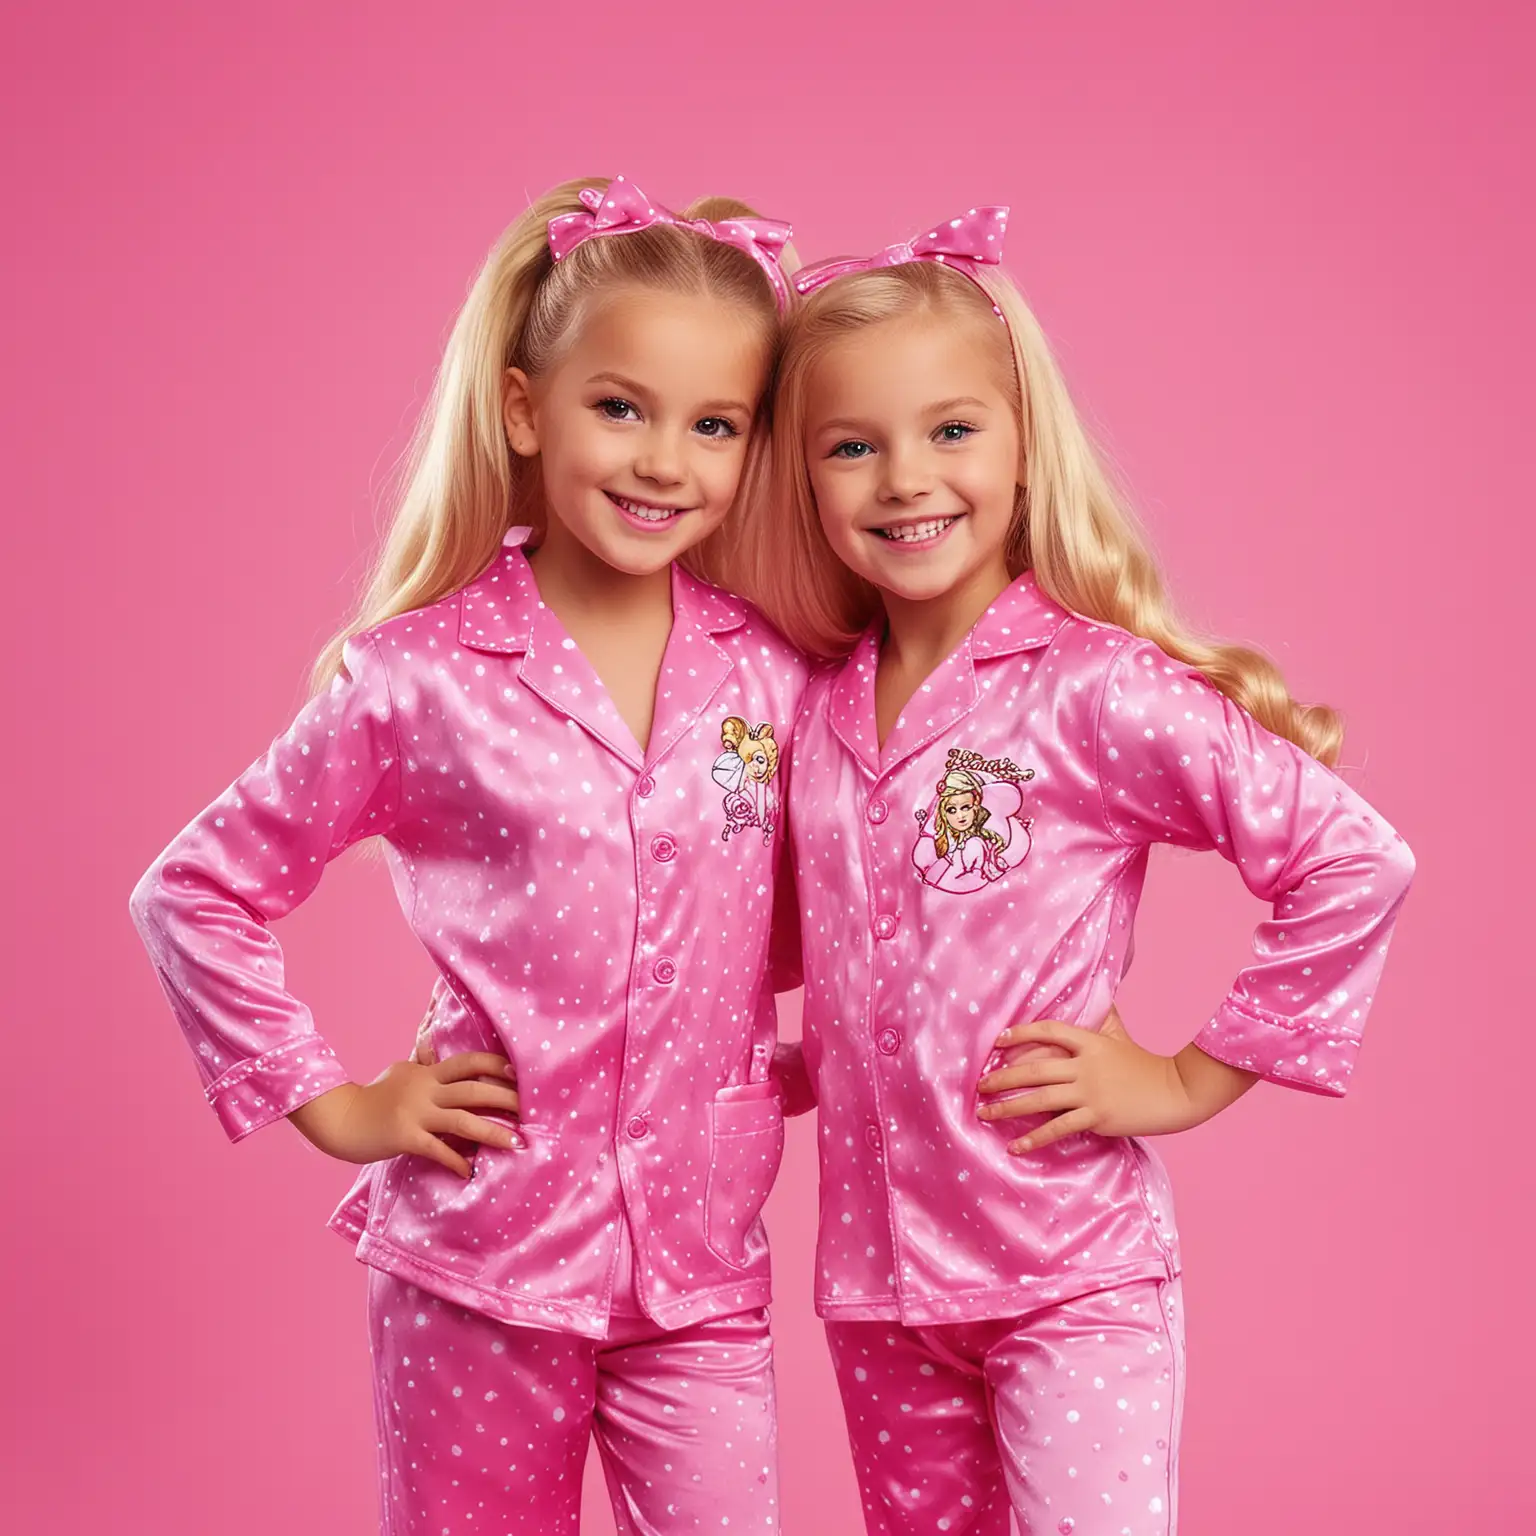 two children aged 4-6 years old. fun. confident. bright. happy. smiles. dance camp. barbie theme. close up. pink pajama party. dancing in my dreams.